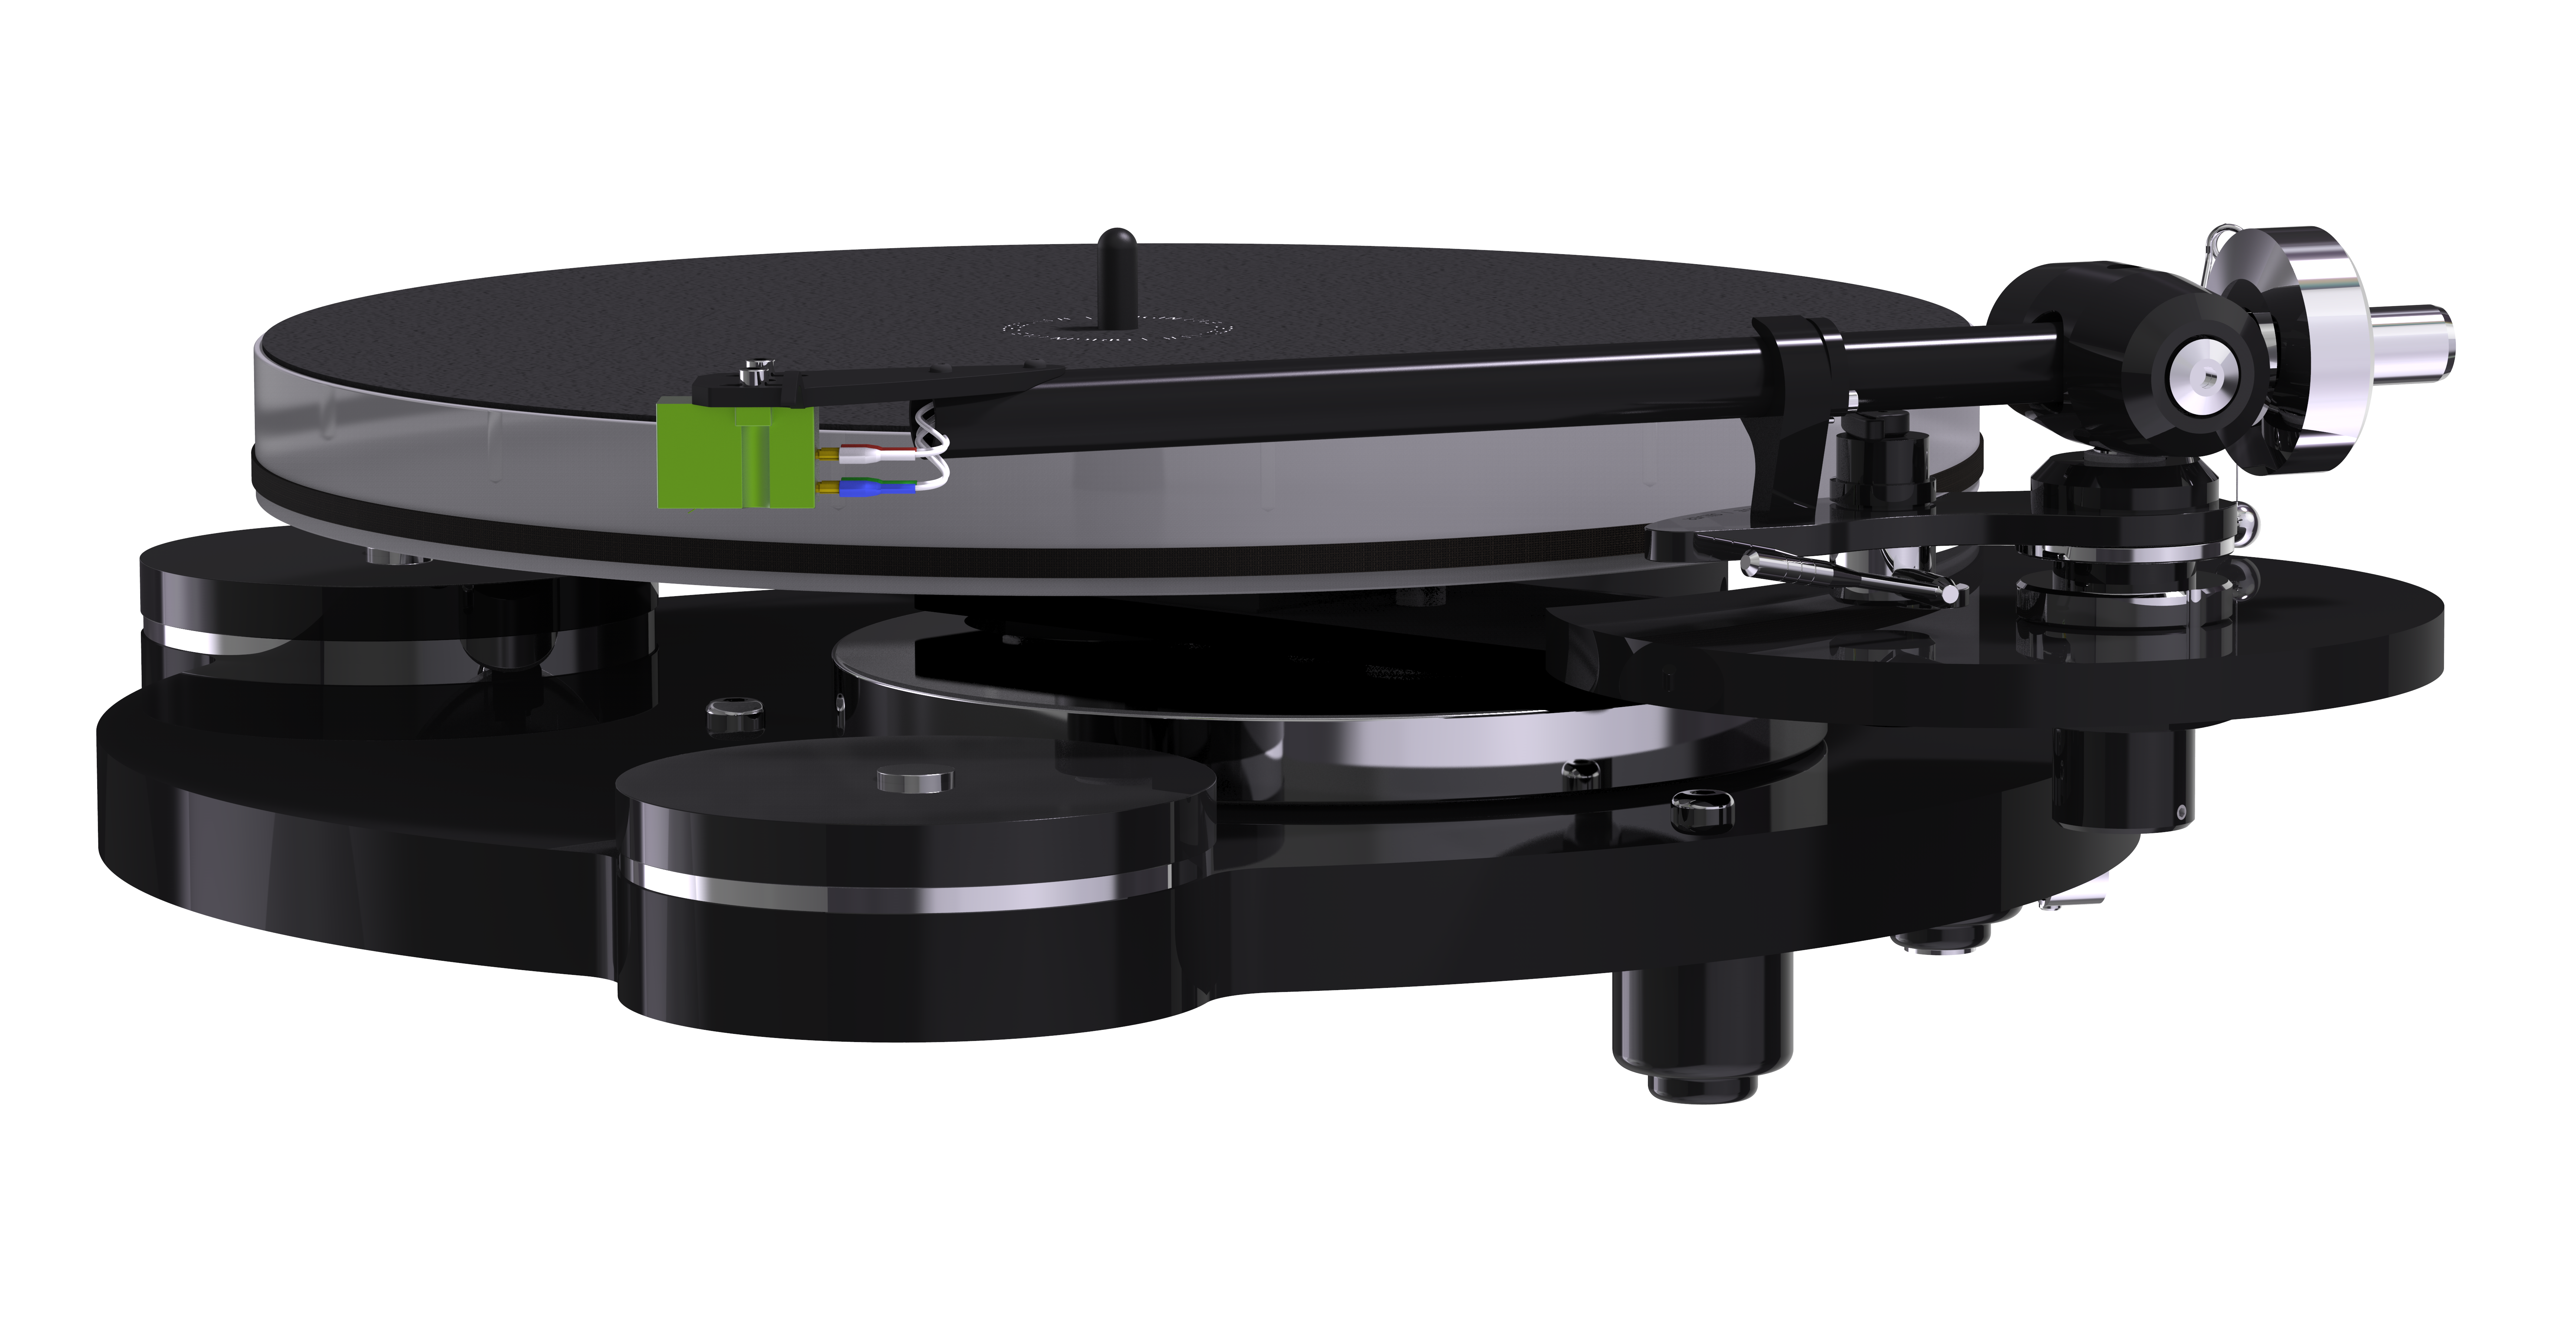 Origin Live Hi-Fi Calypso Turntable encounter tonearm a high end turntable for analogue vinyl audio playback with mid-century mid century retro styling